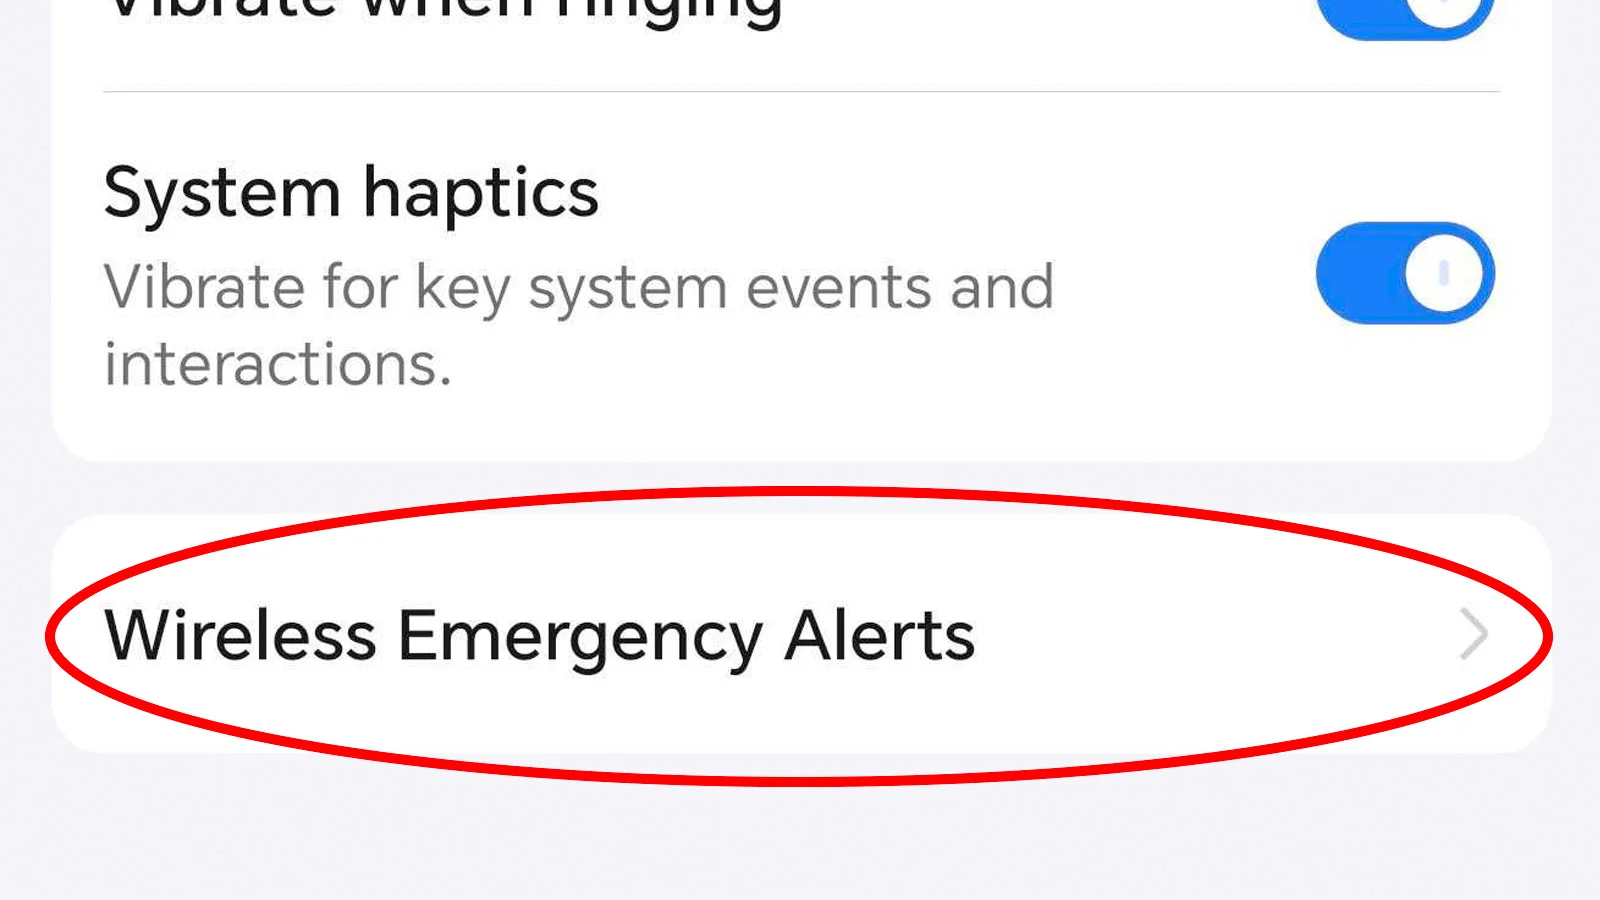 Confusion Reigns as Severe Emergency Alerts Baffle Mobile Phone Users